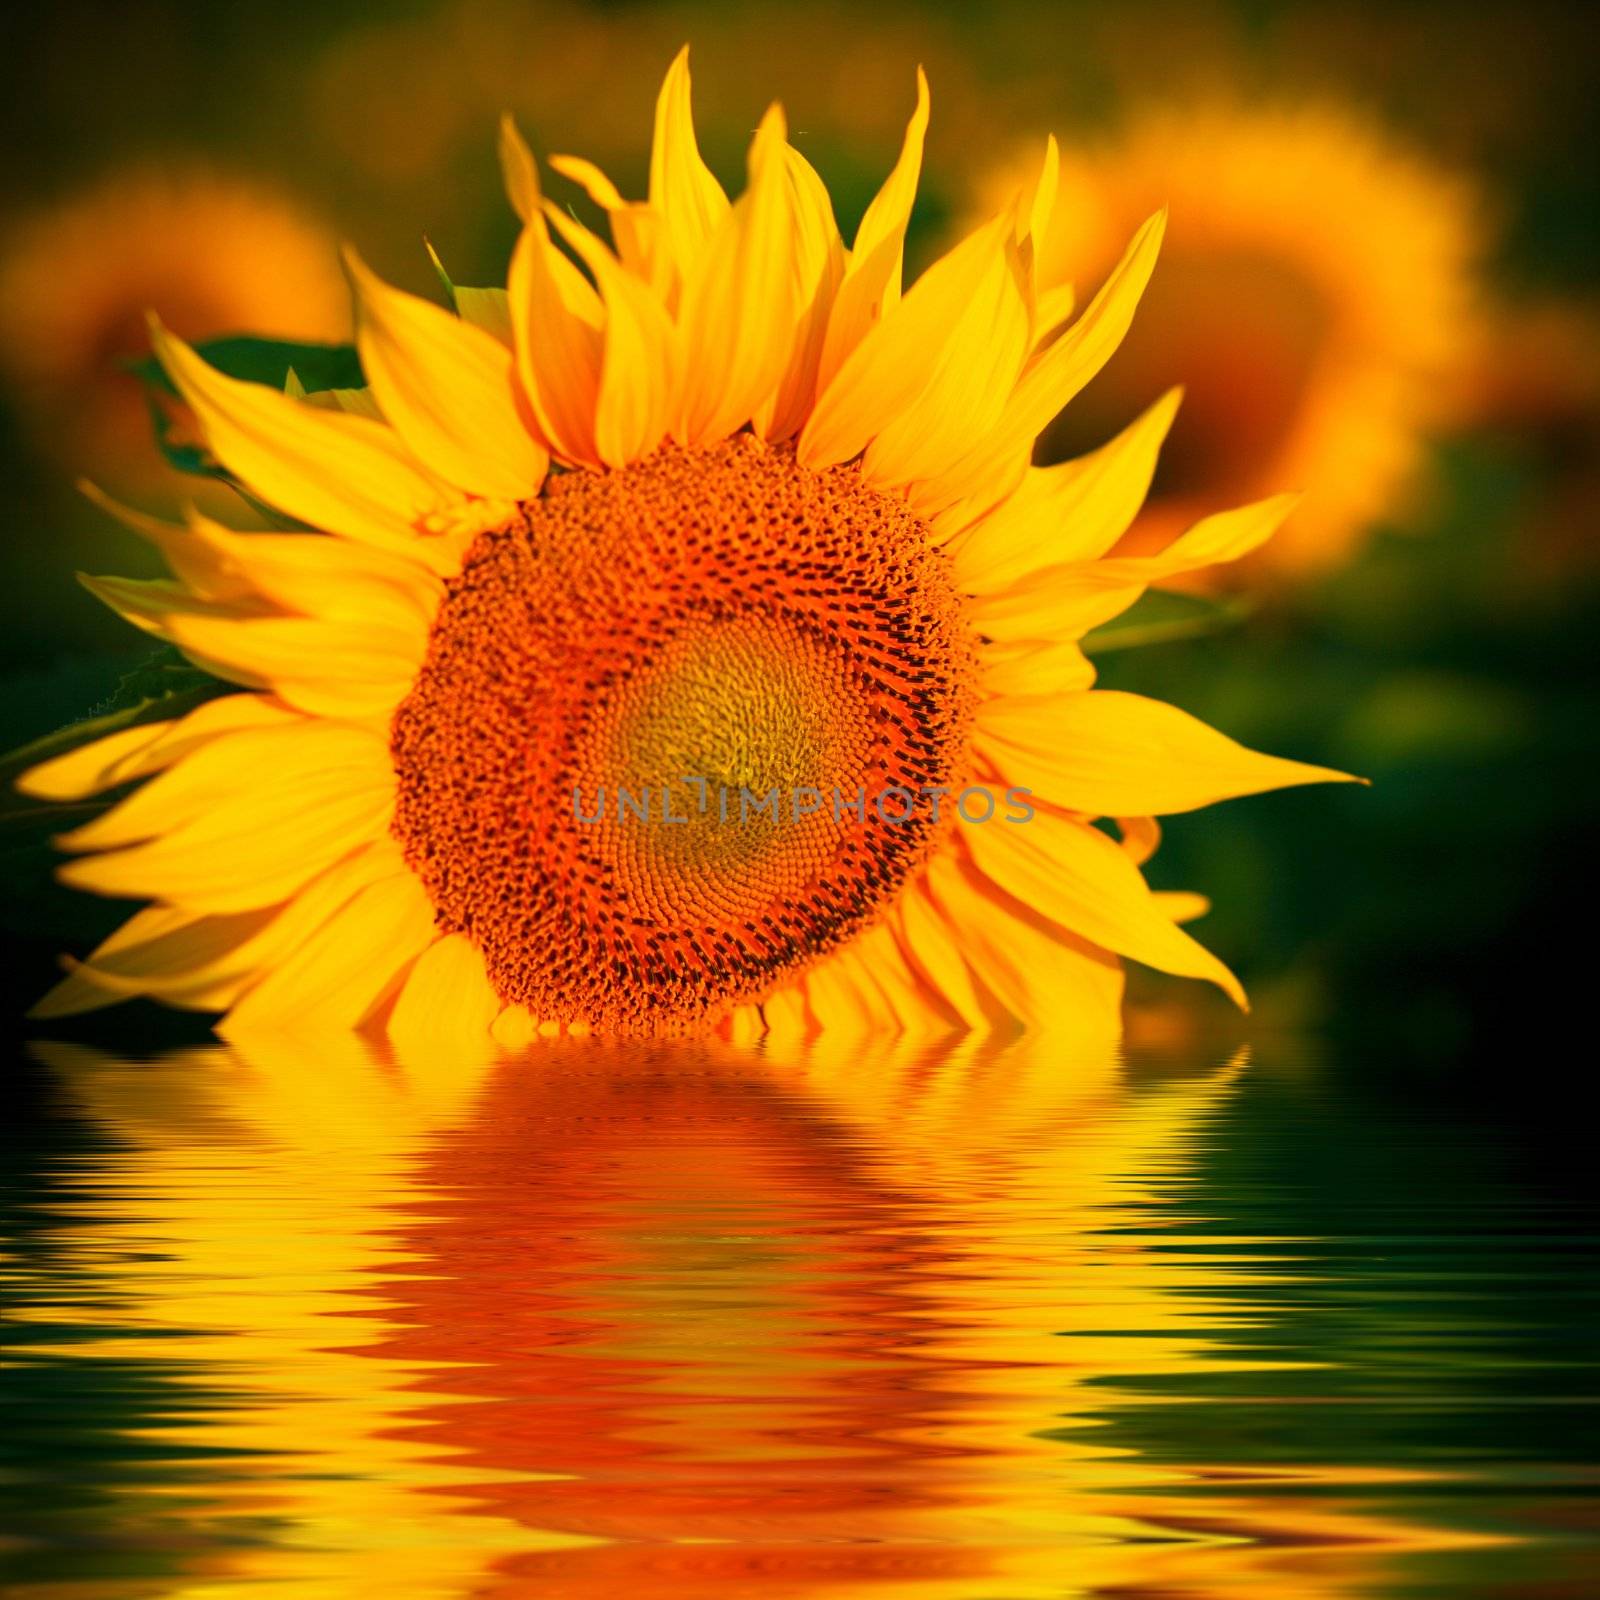 An image of yellow flowers in a river